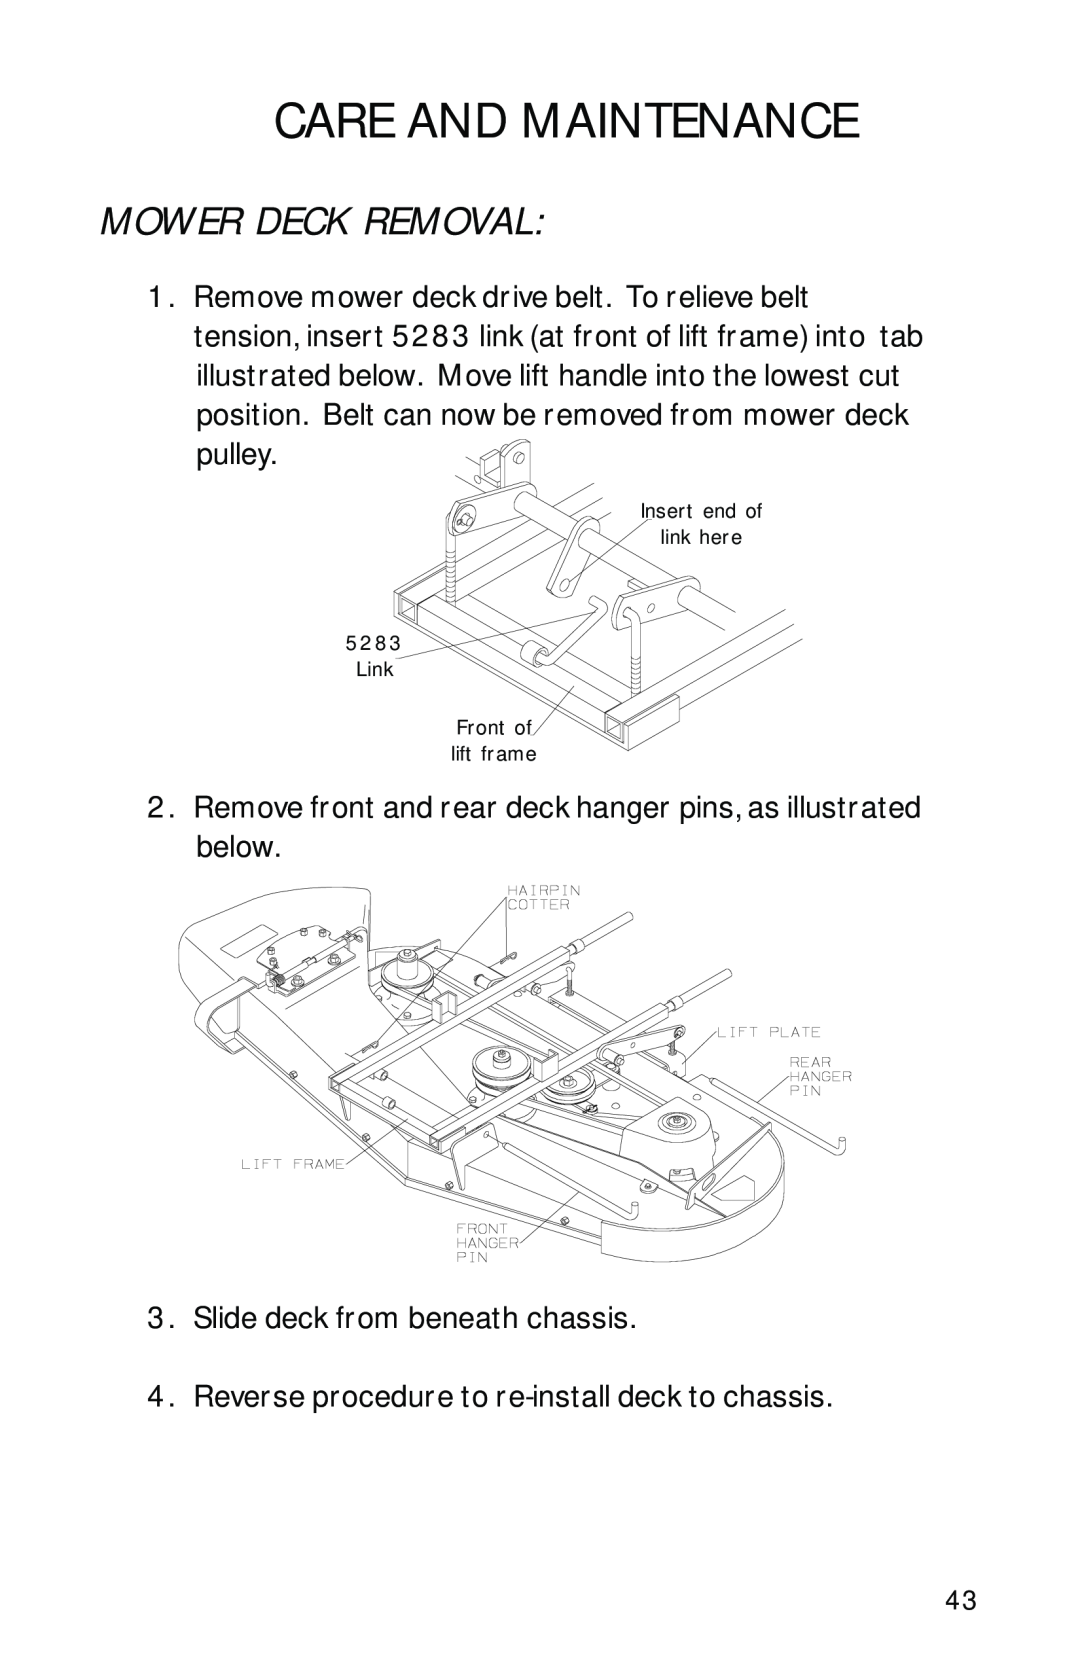 Dixon 1950-2300 Series manual Mower Deck Removal, Care And Maintenance 